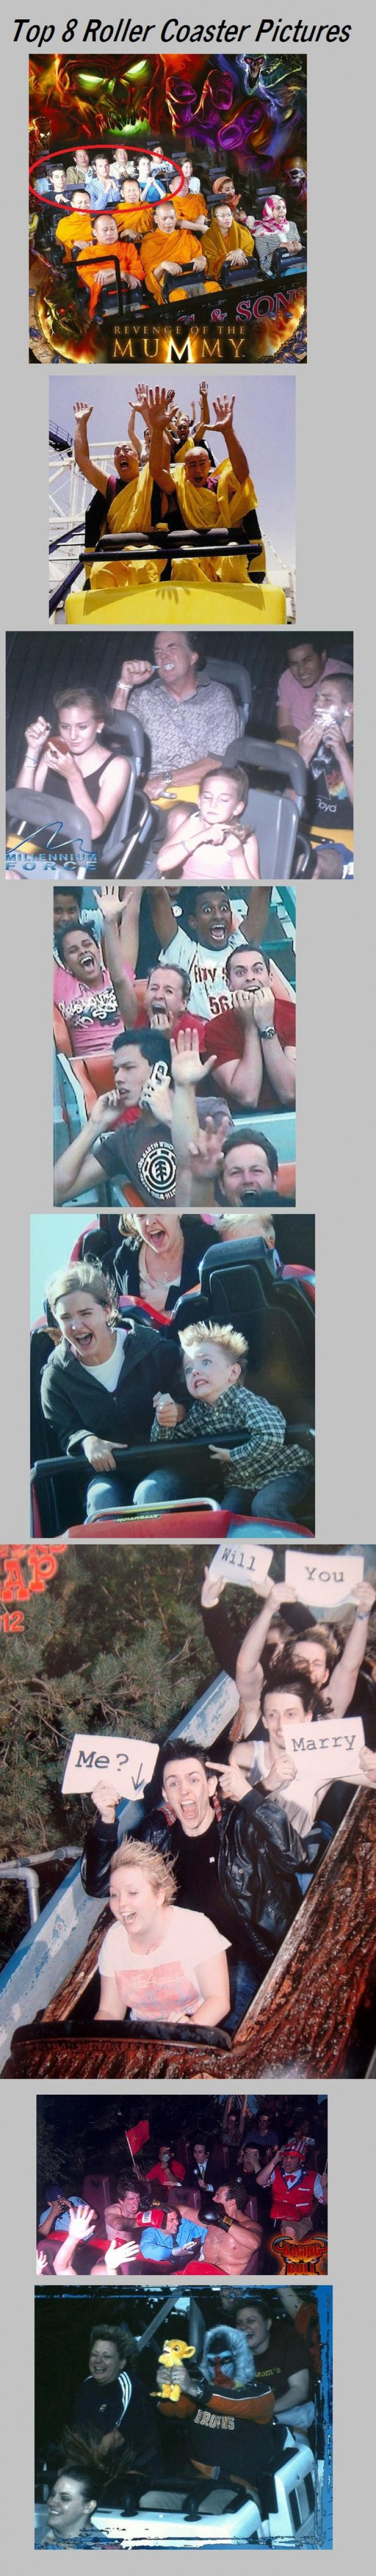 Top 8 Roller Coaster Pictures